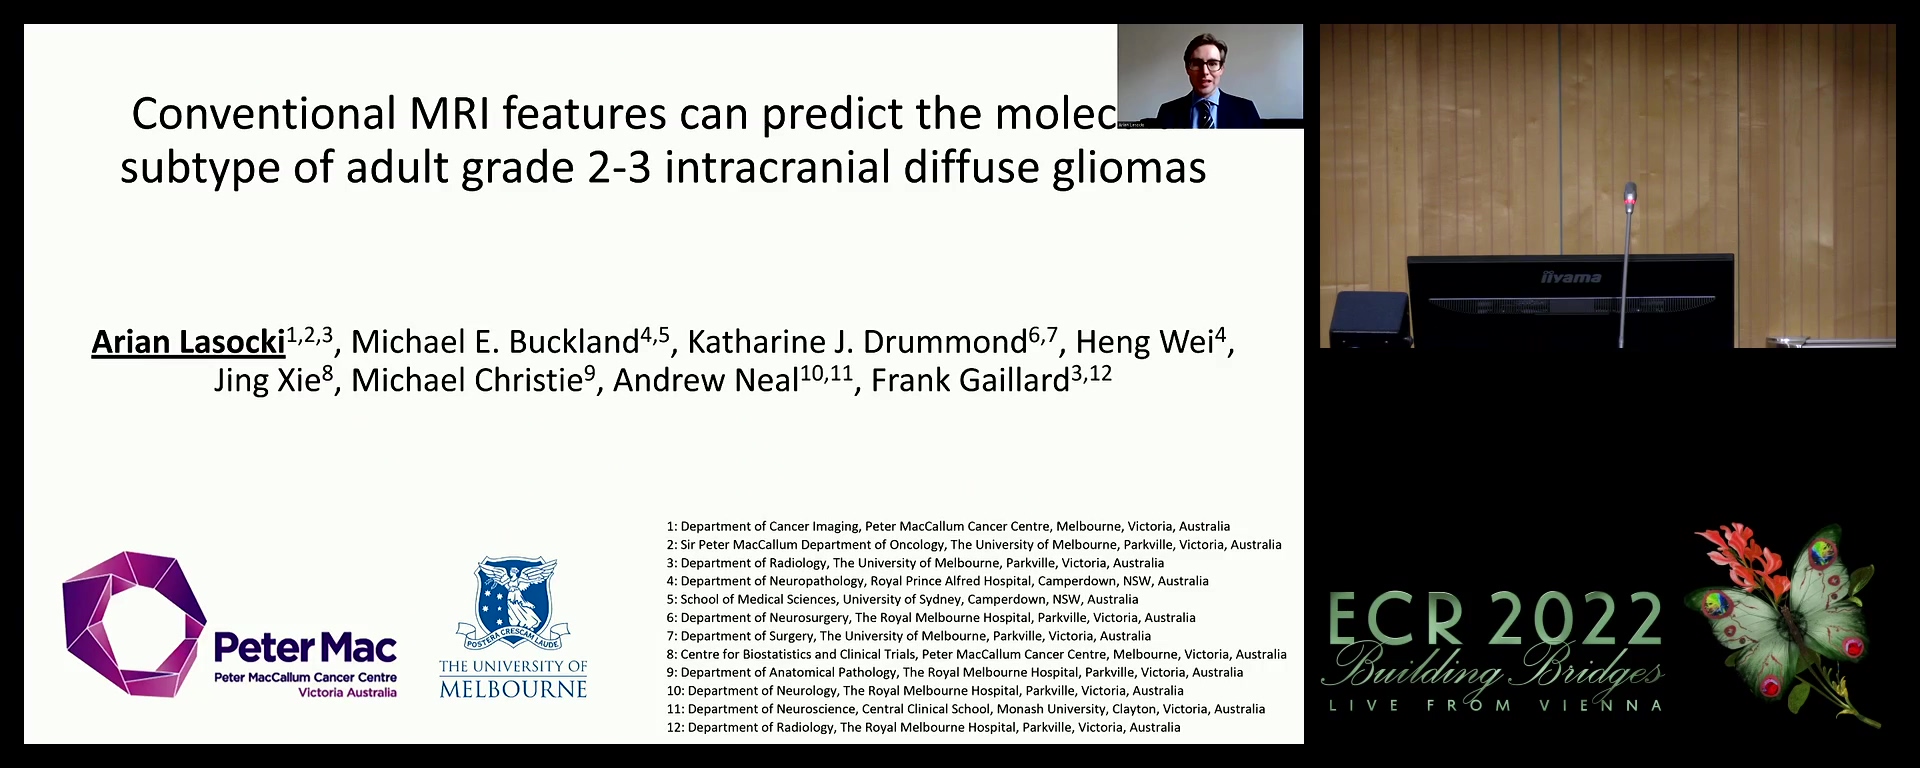 Conventional MRI features can predict the molecular subtype of adult grade 2-3 intracranial diffuse gliomas